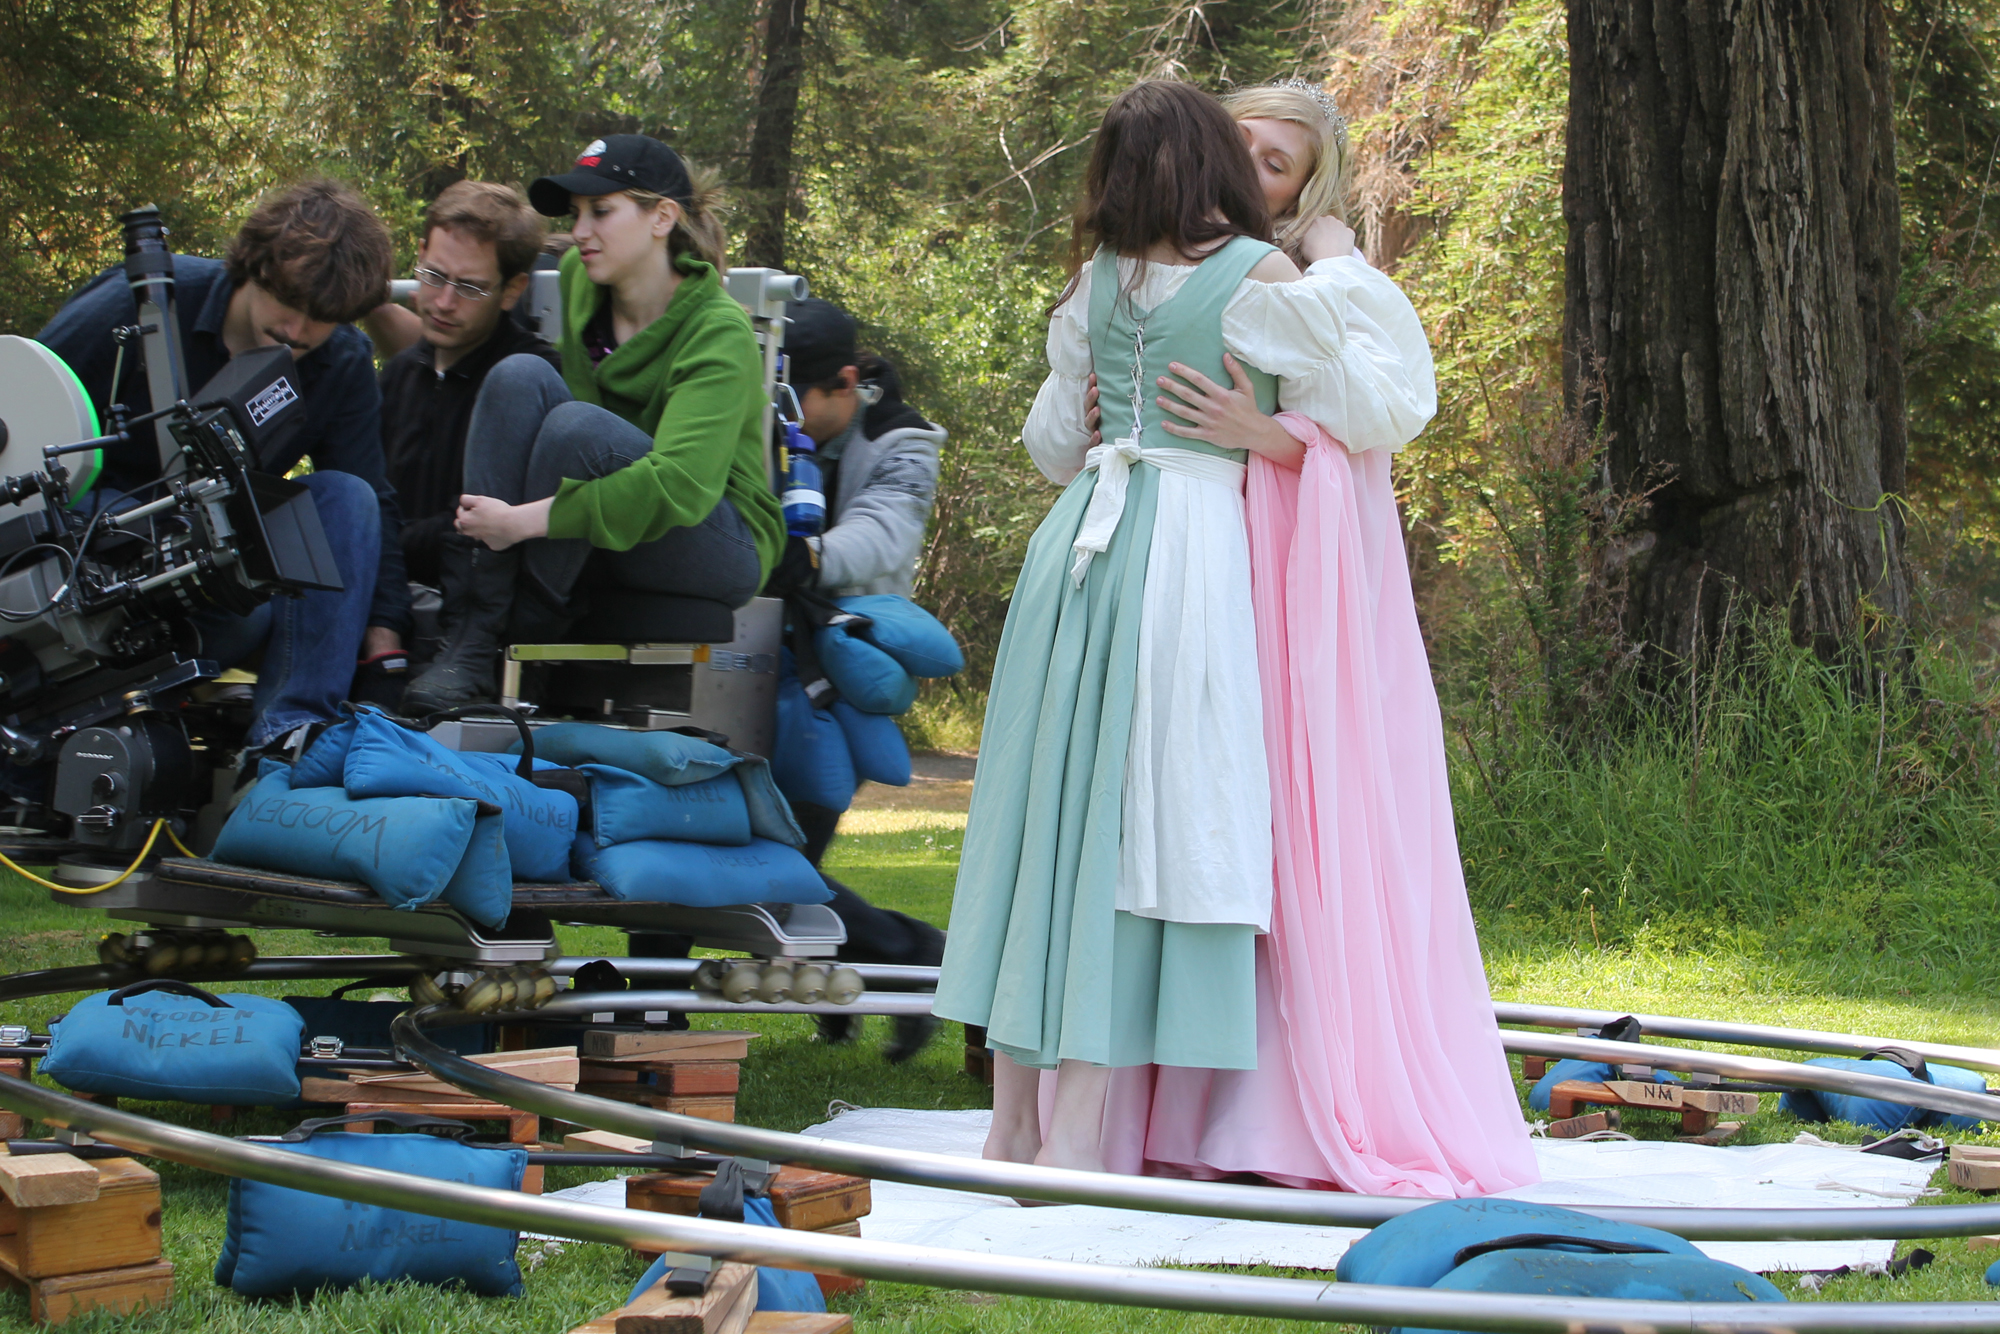 The Maiden and the Princess (2010) Lindsay N.W. LaVanchy as The Princess, Lora Plattner as The Maiden